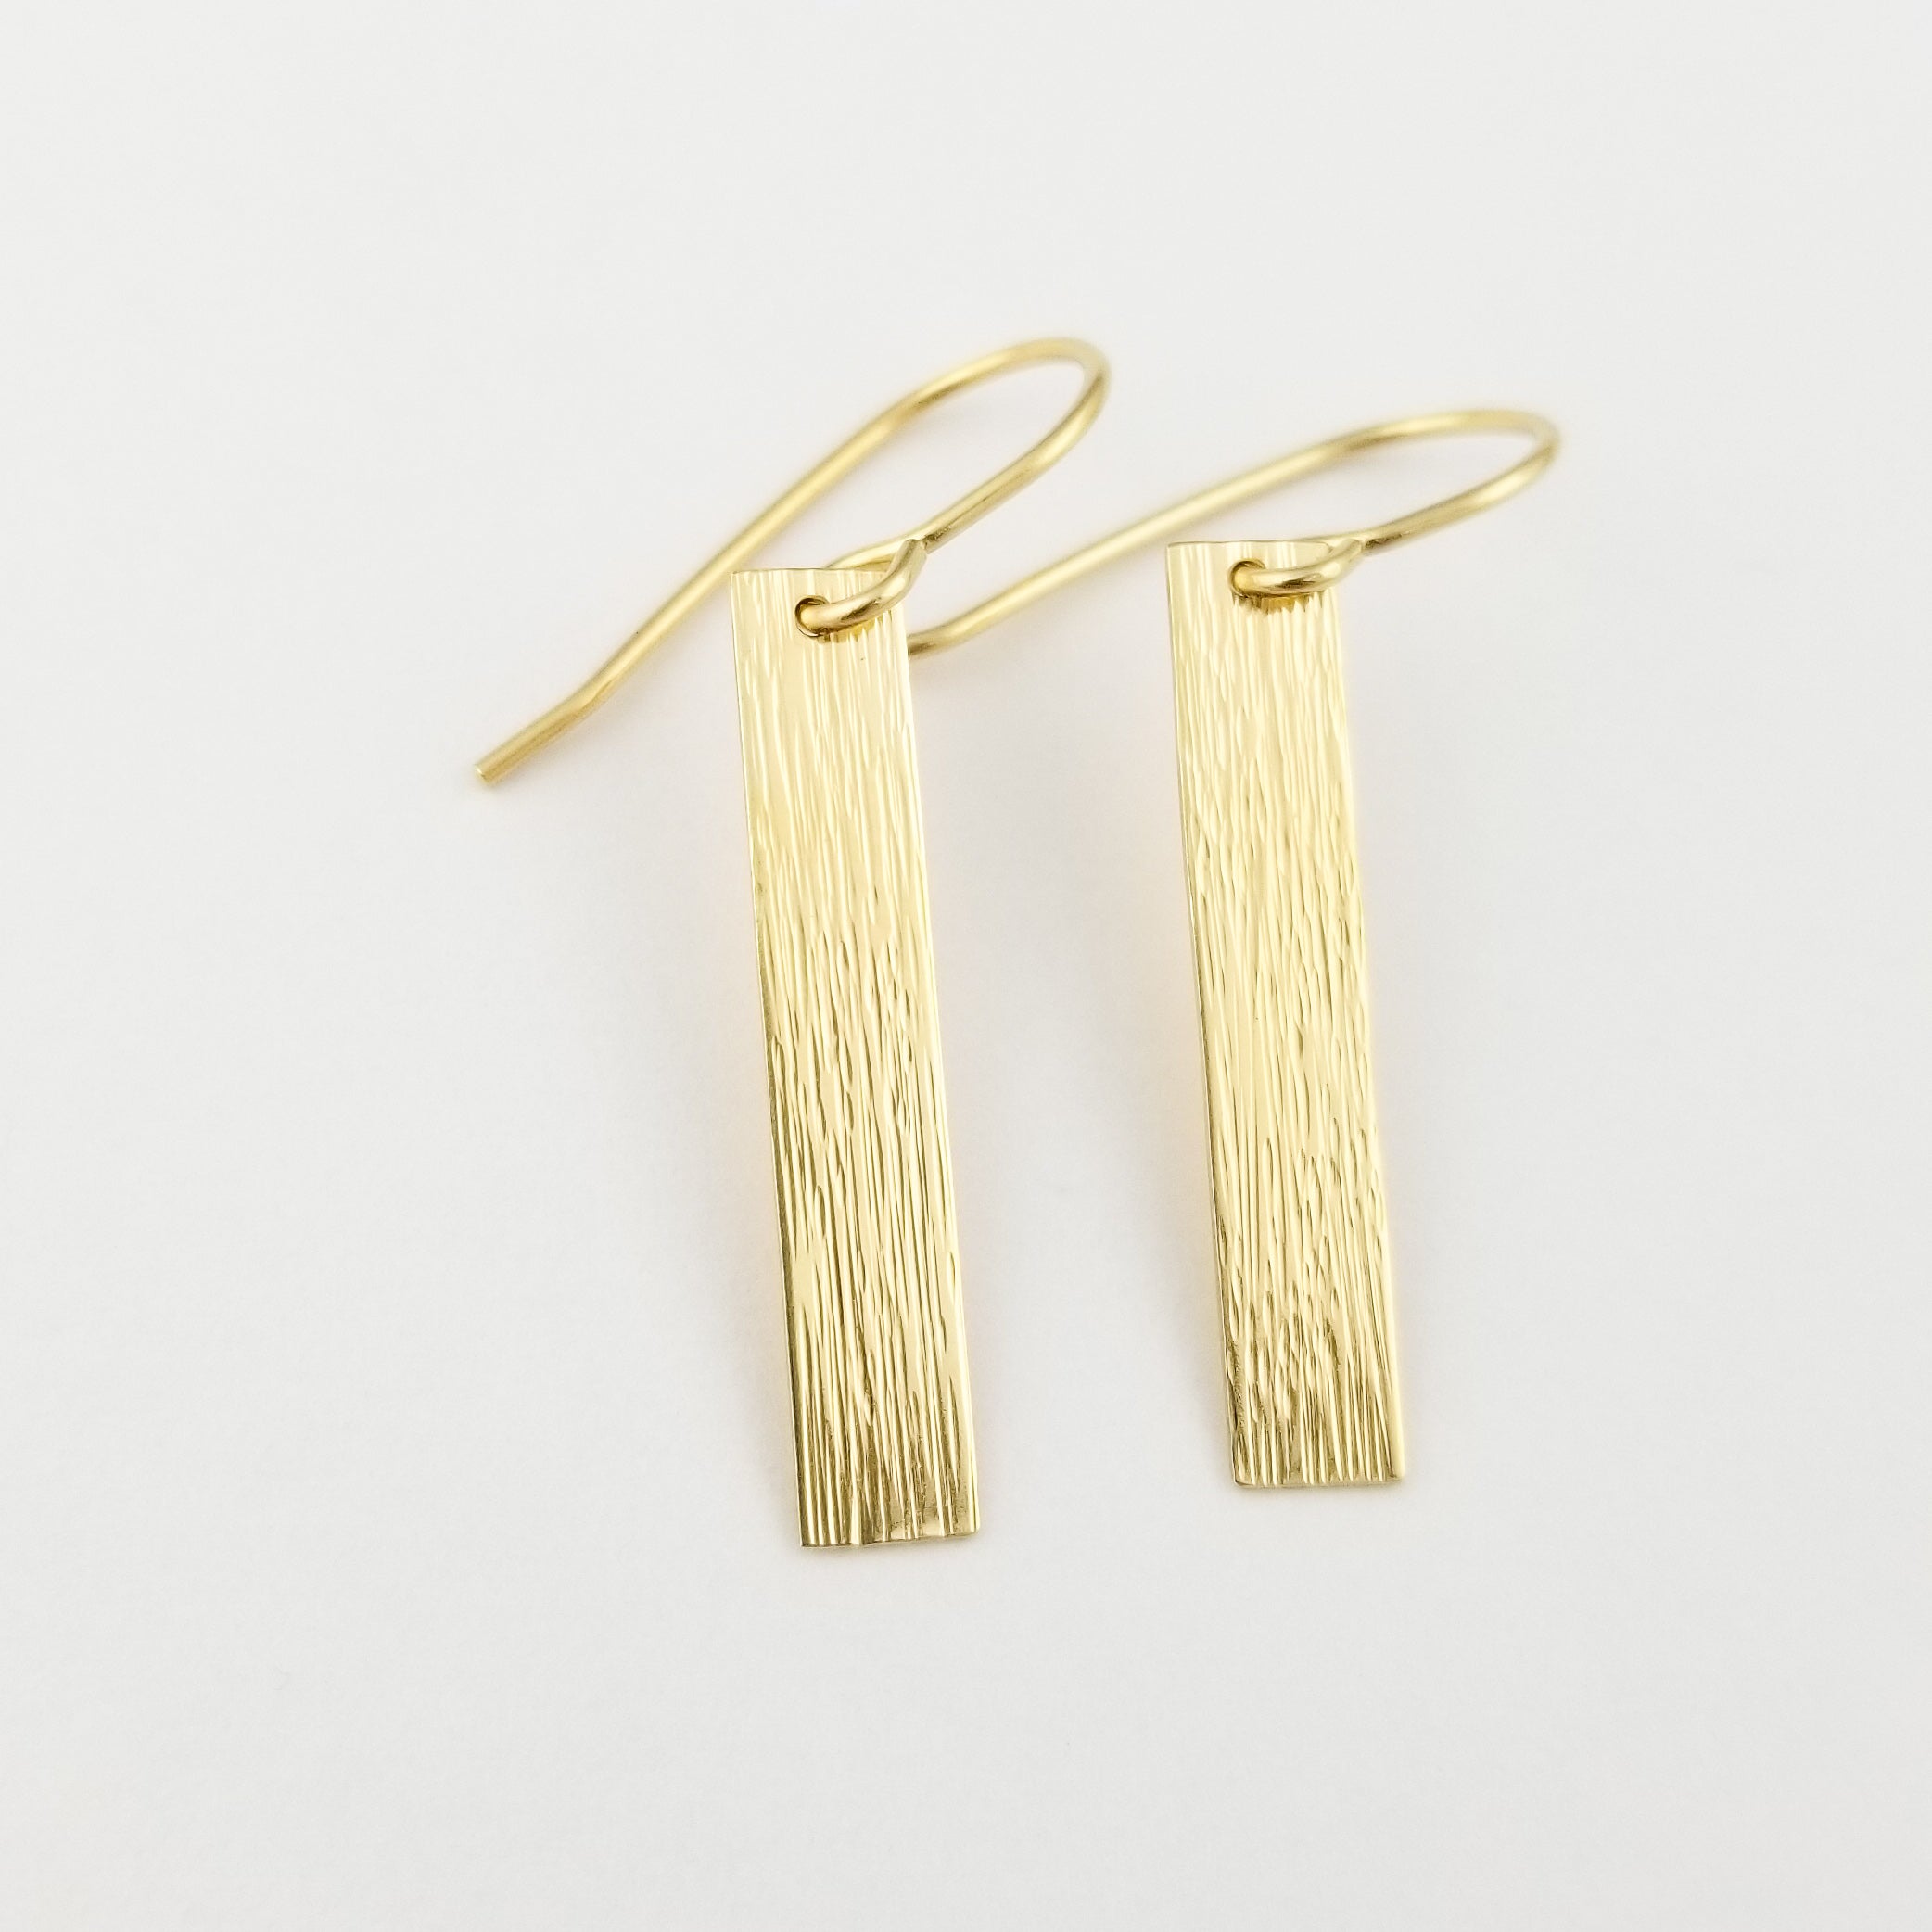 Vertically Hammered Solid 14k Gold Rectangle Earrings - Aris Designs